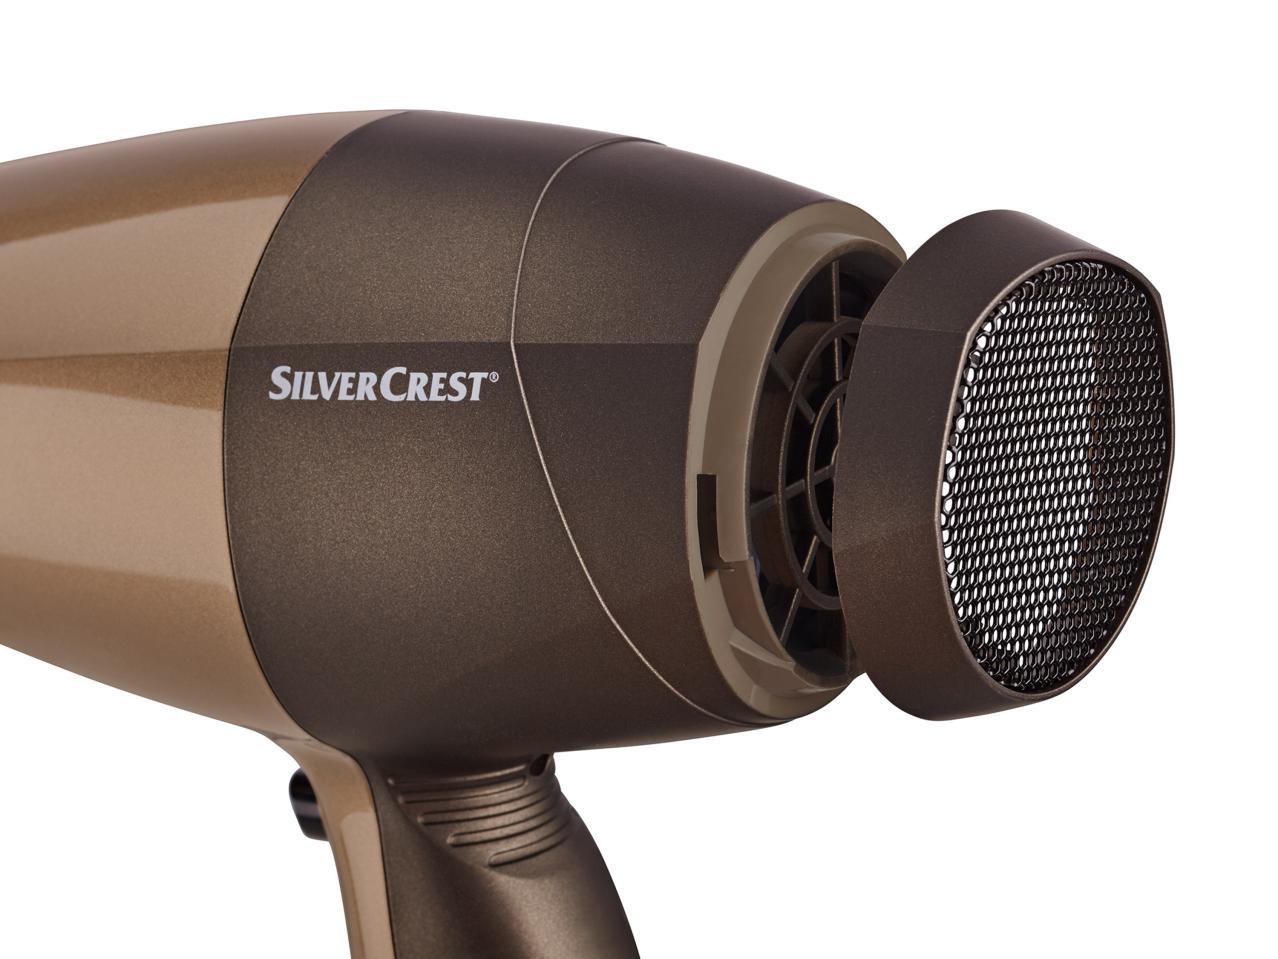 Silvercrest Personal Care Professional Ionic AC Hair Dryer1